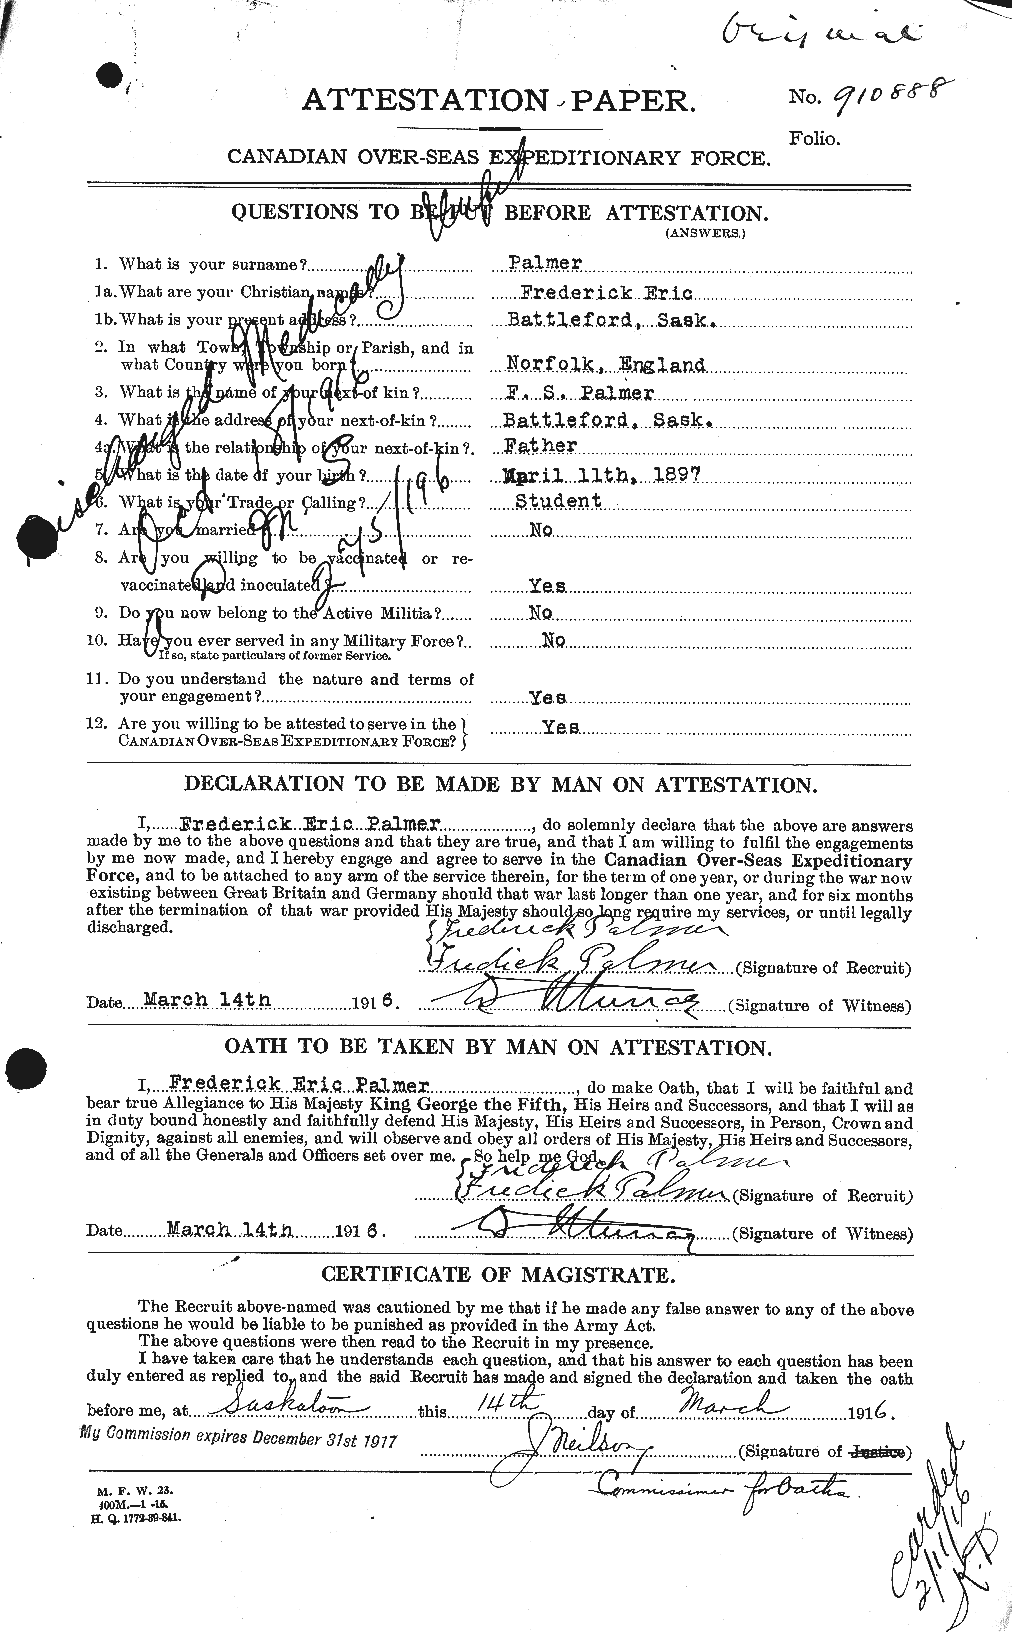 Personnel Records of the First World War - CEF 562898a